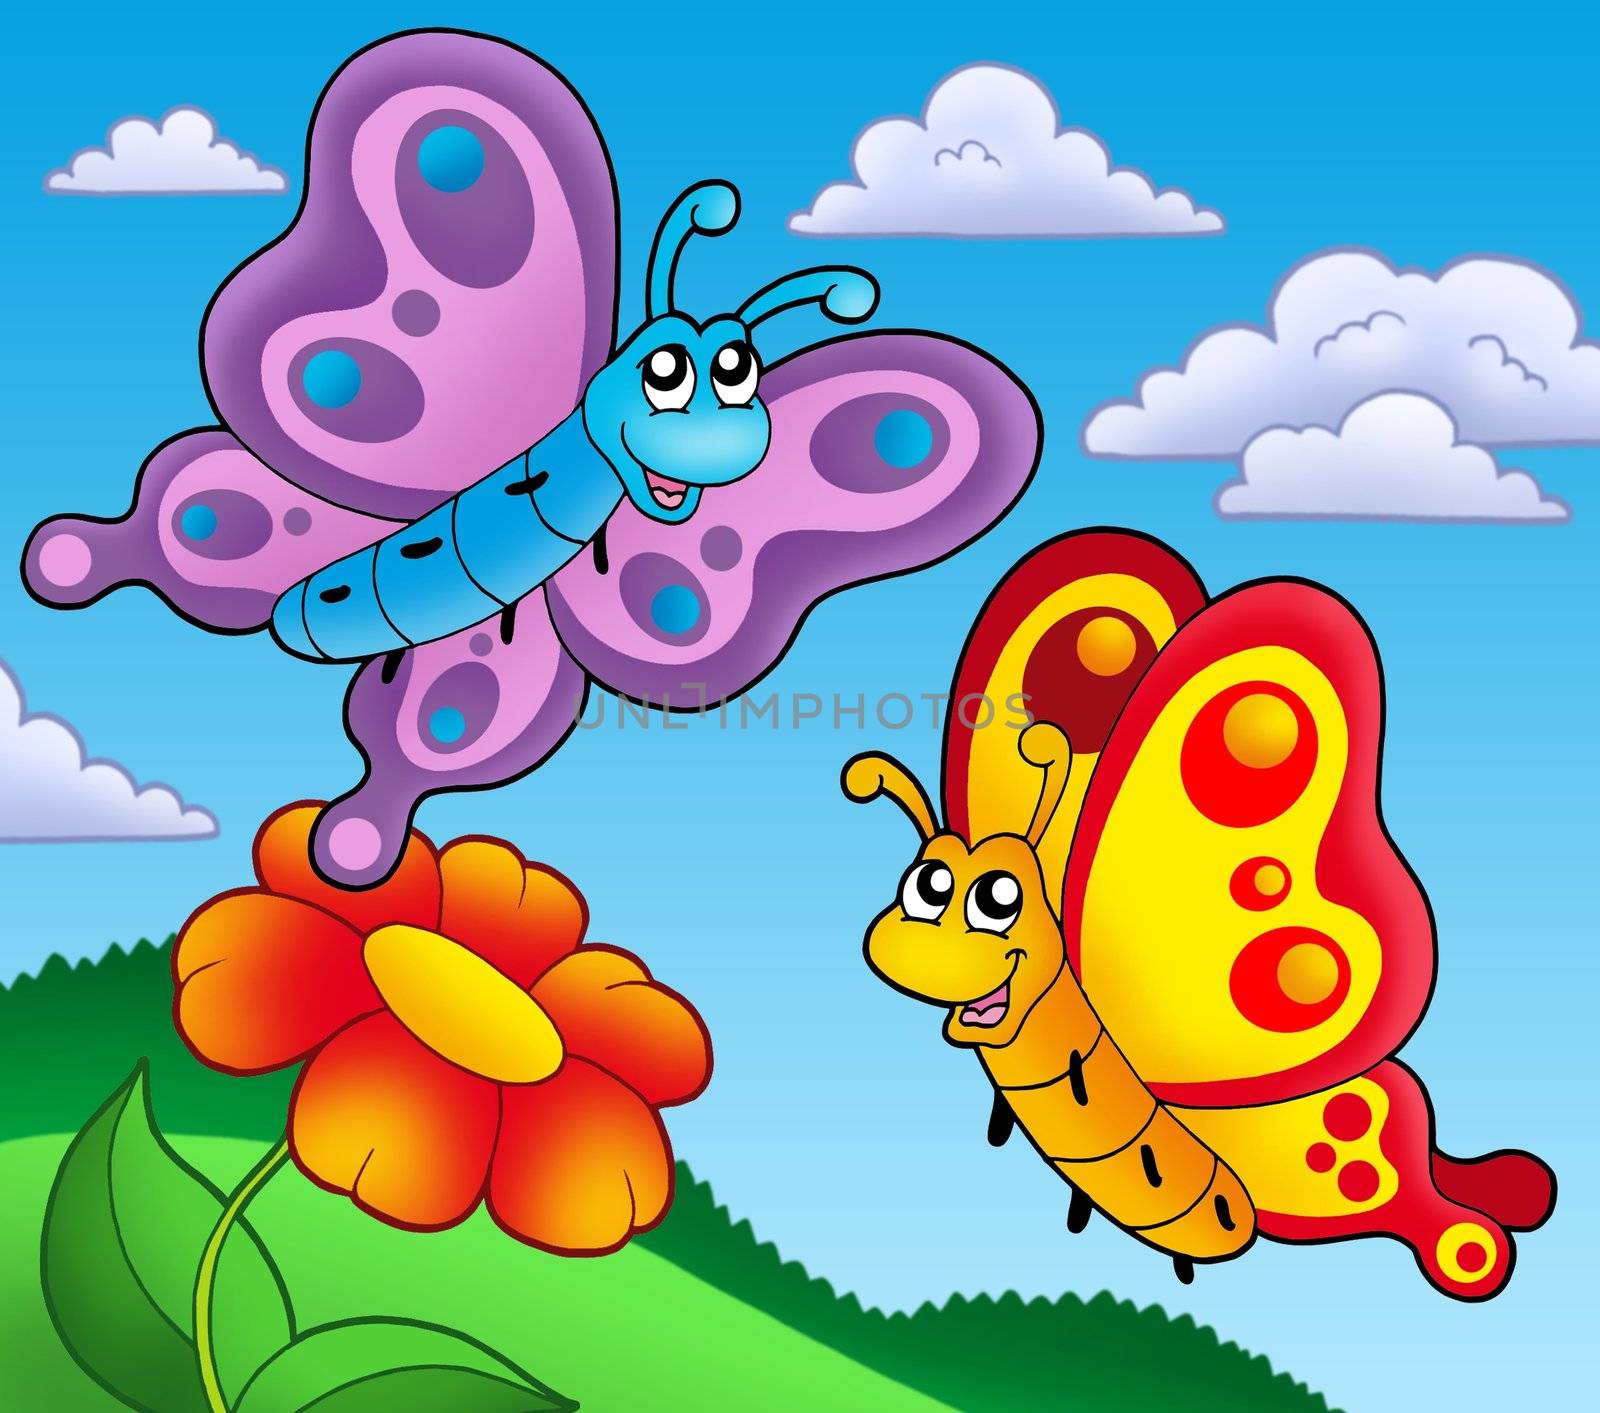 Pair of butterflies with red flower - color illustration.